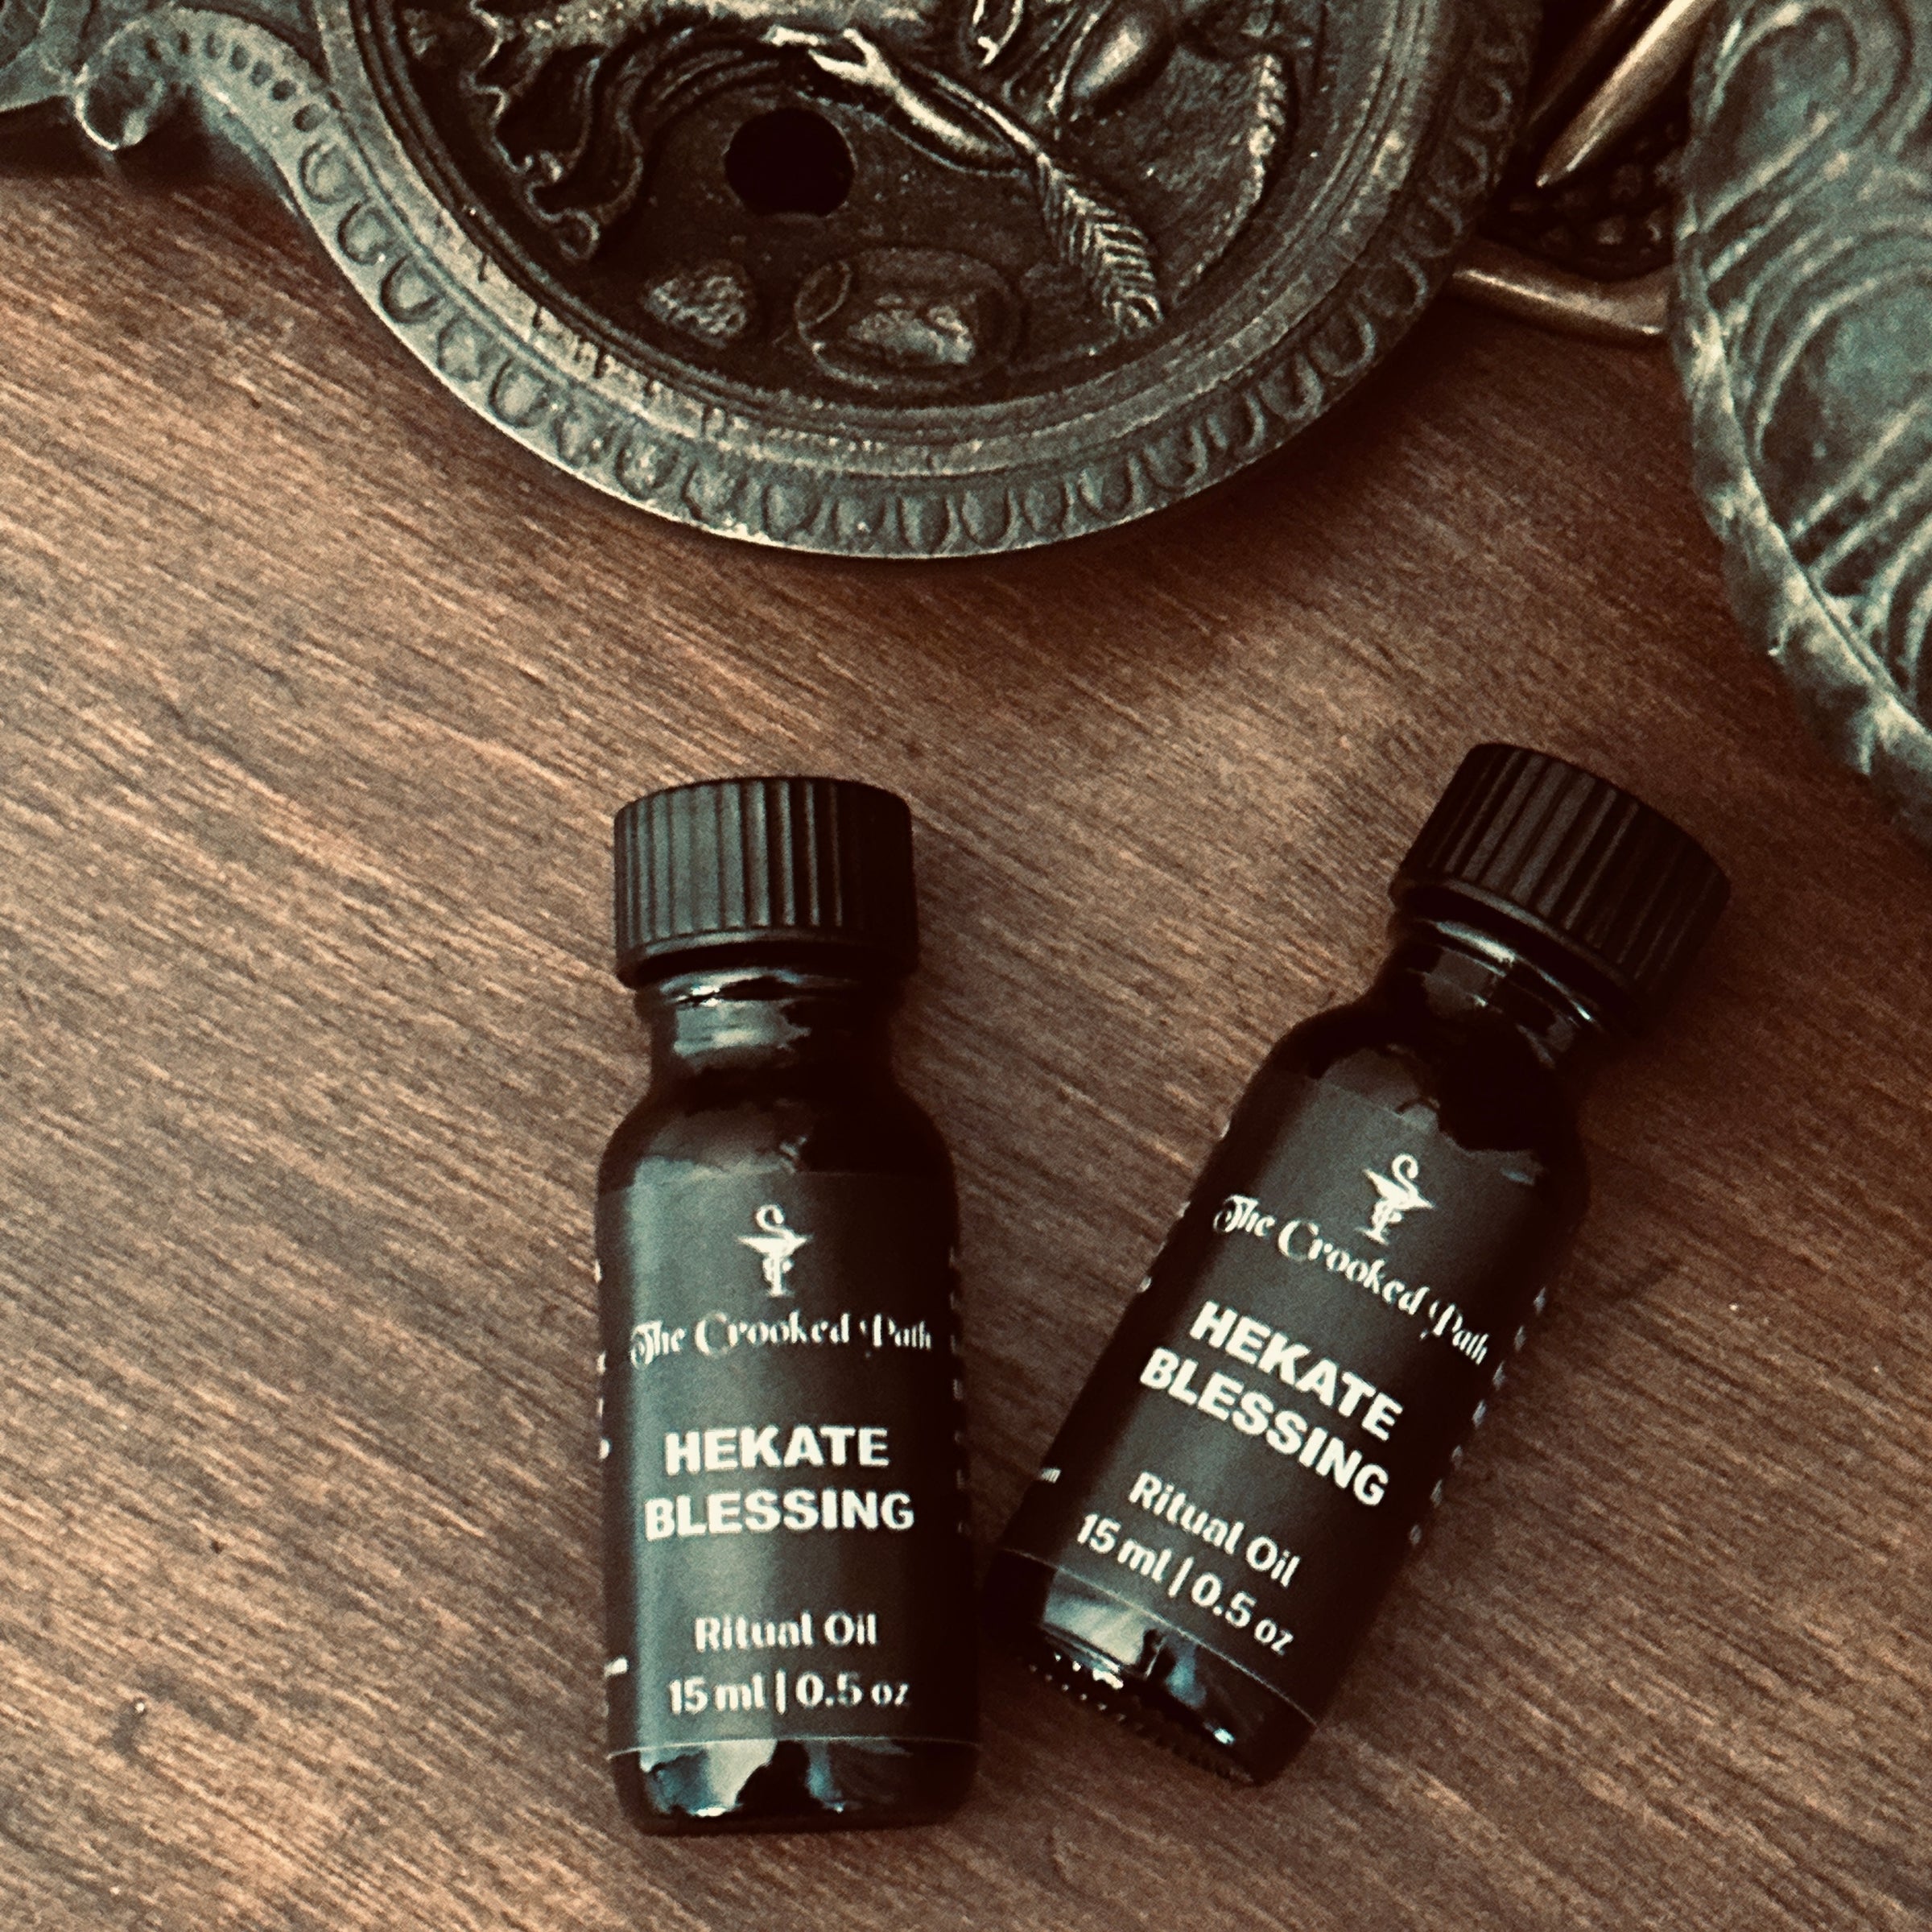 Spell On You Essential Oil – Kirona Scent